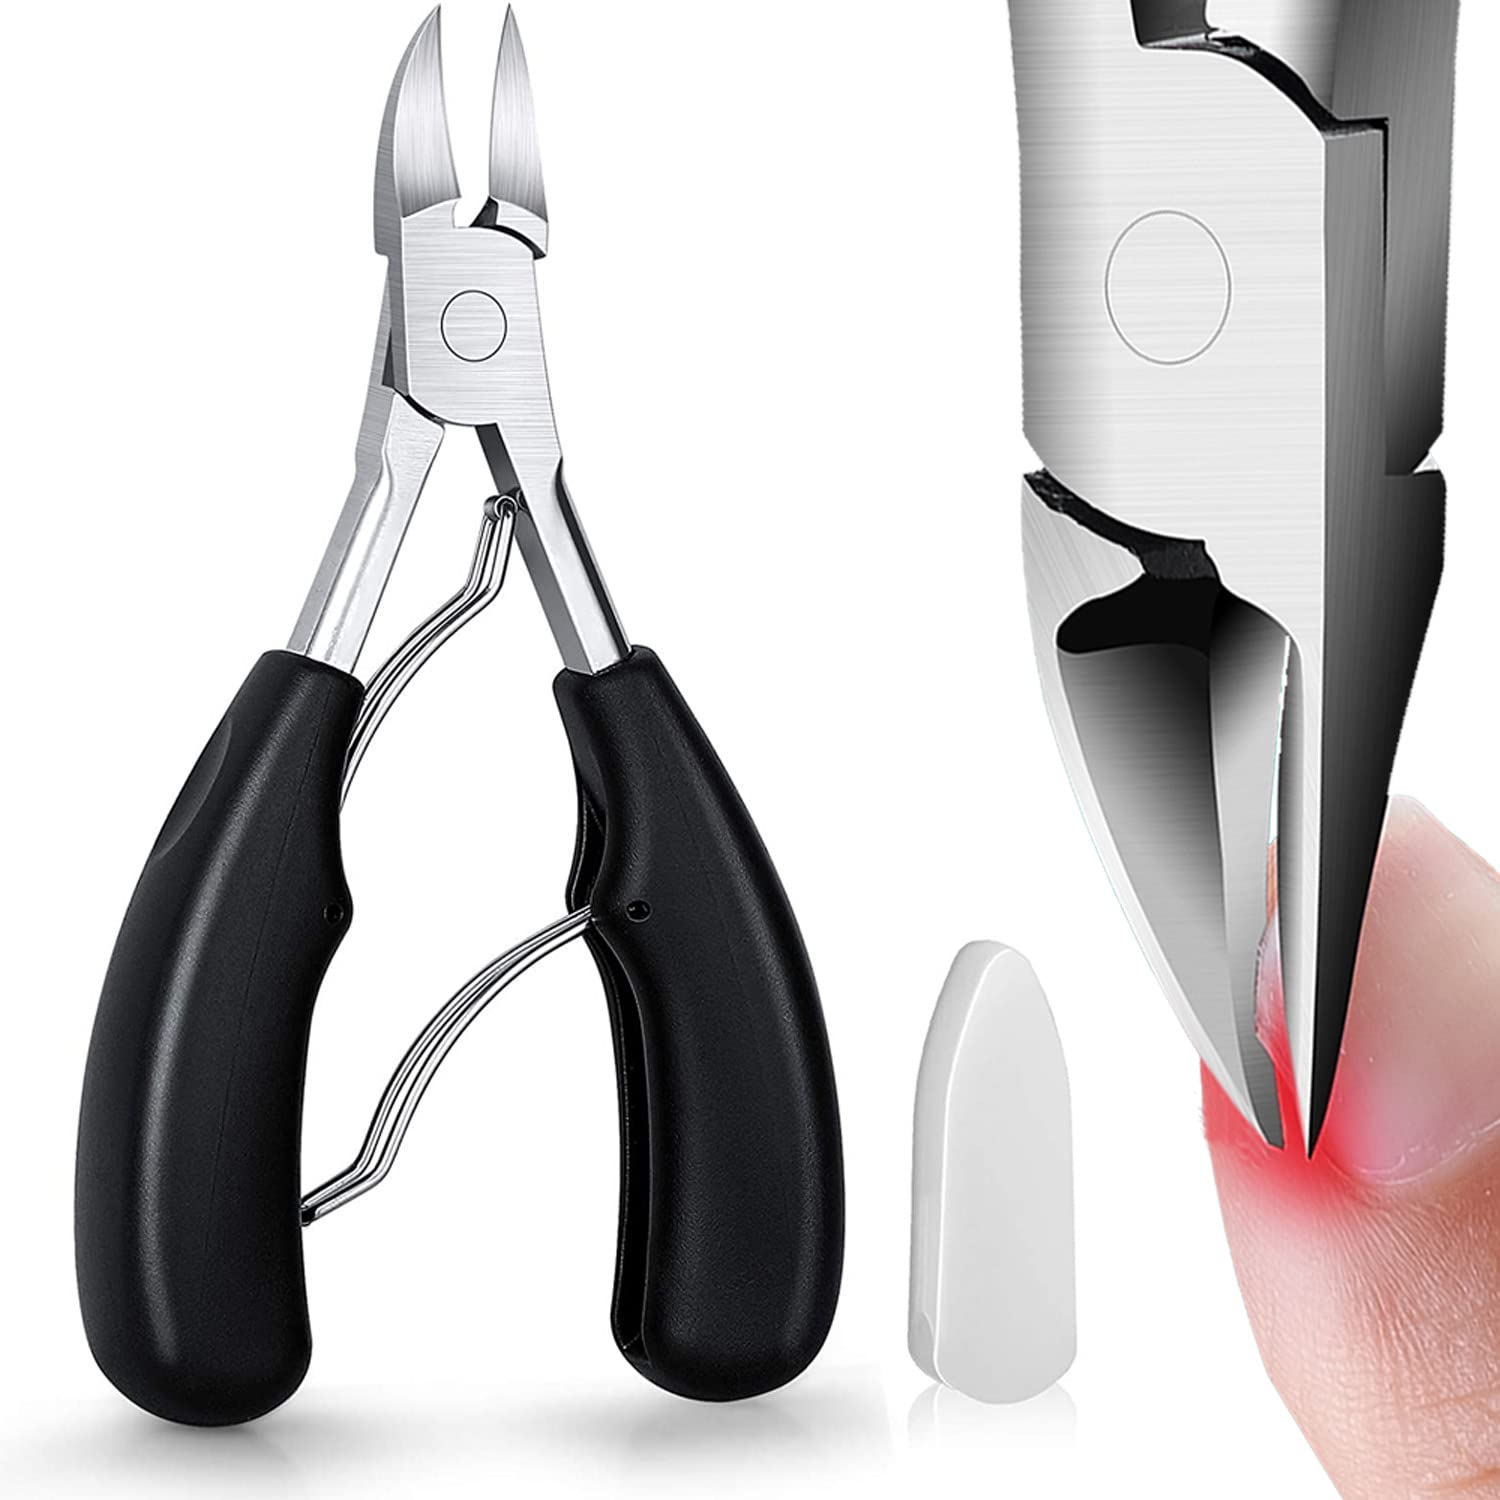 Venoteck Nail Clippers for Thick Nails,Fingernail Toenail Clippers,Nail  Clipper Set for Adult Men Women